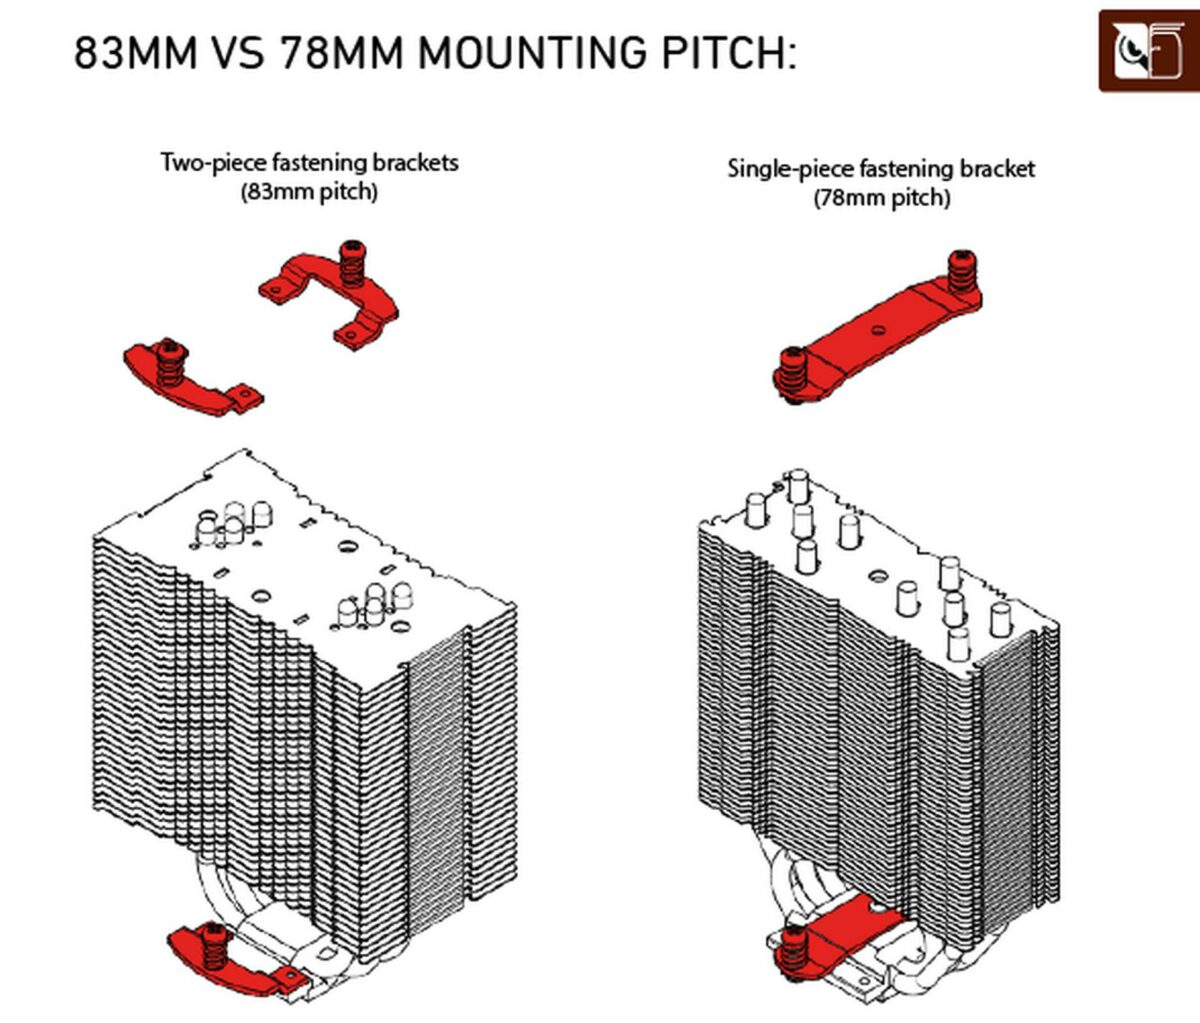 Diagram showing the difference between 83mm and 78mm mounting pitch.